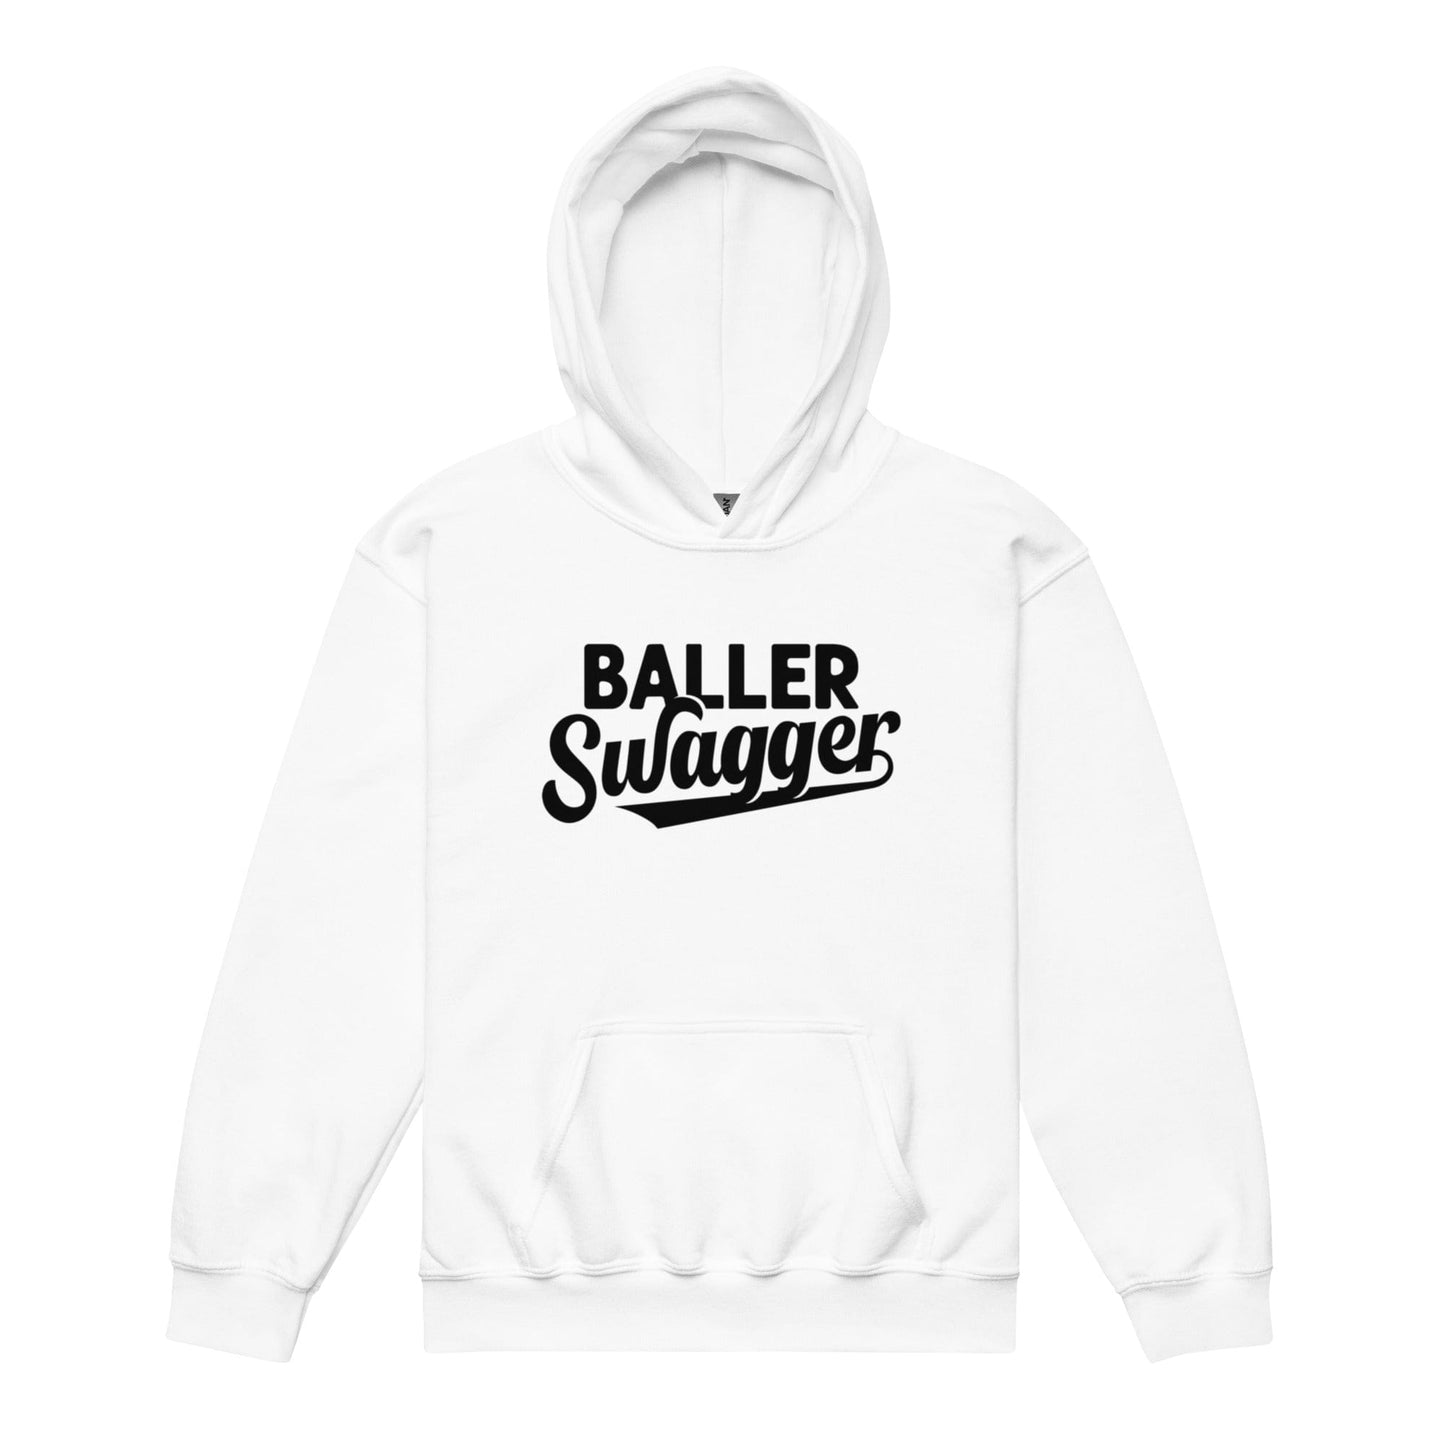 Baller Swagger - Youth Hoodie